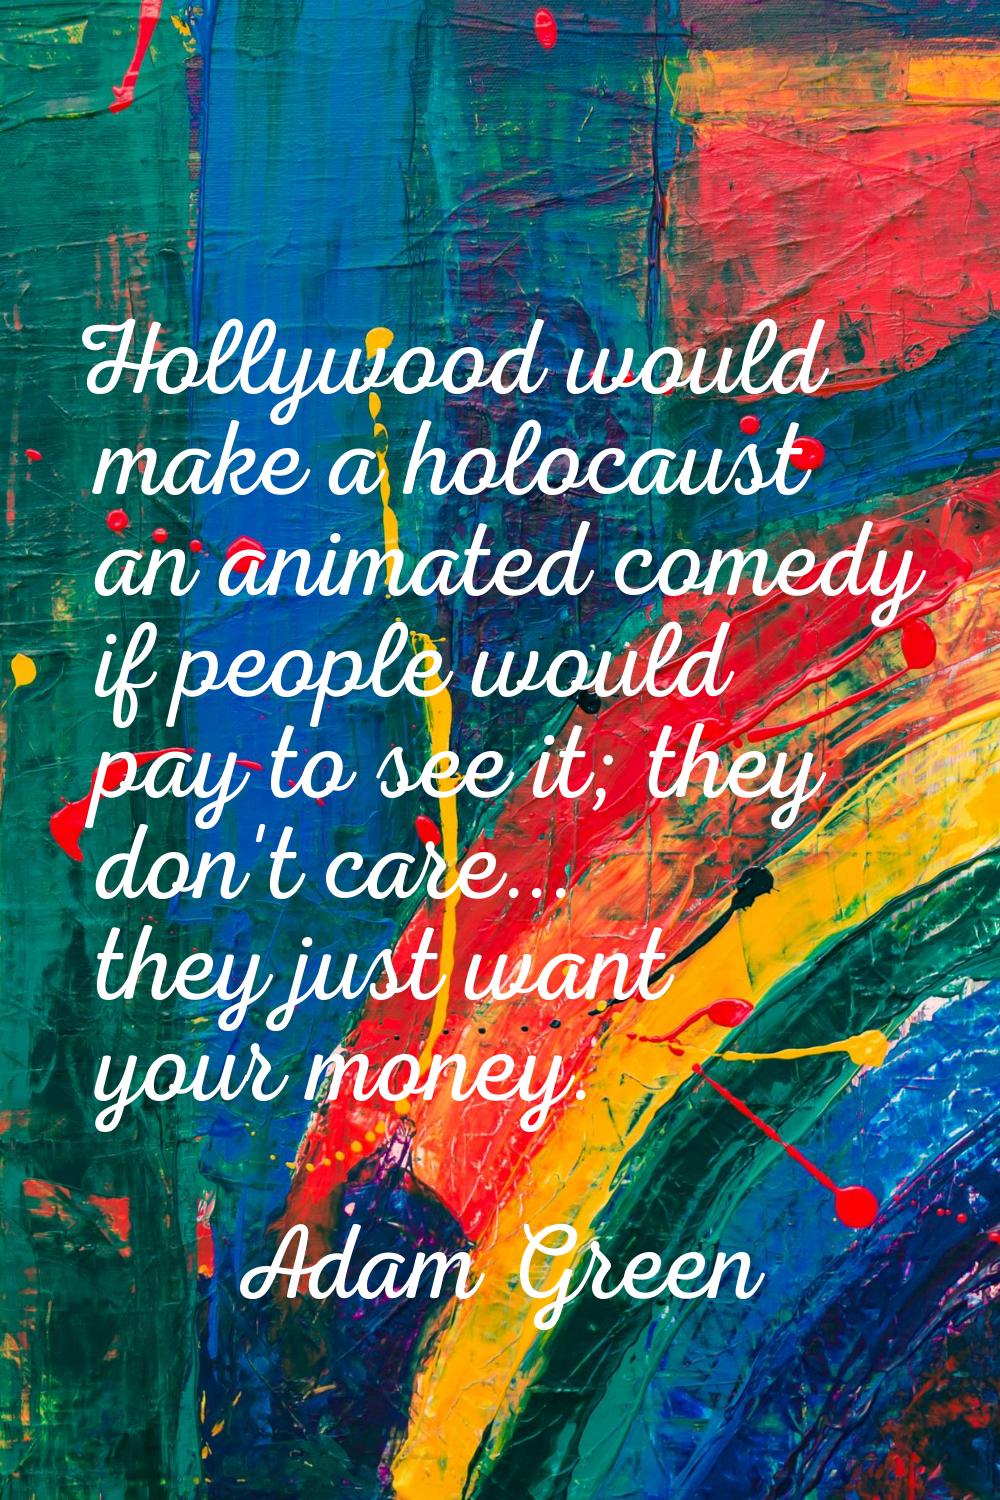 Hollywood would make a holocaust an animated comedy if people would pay to see it; they don't care.